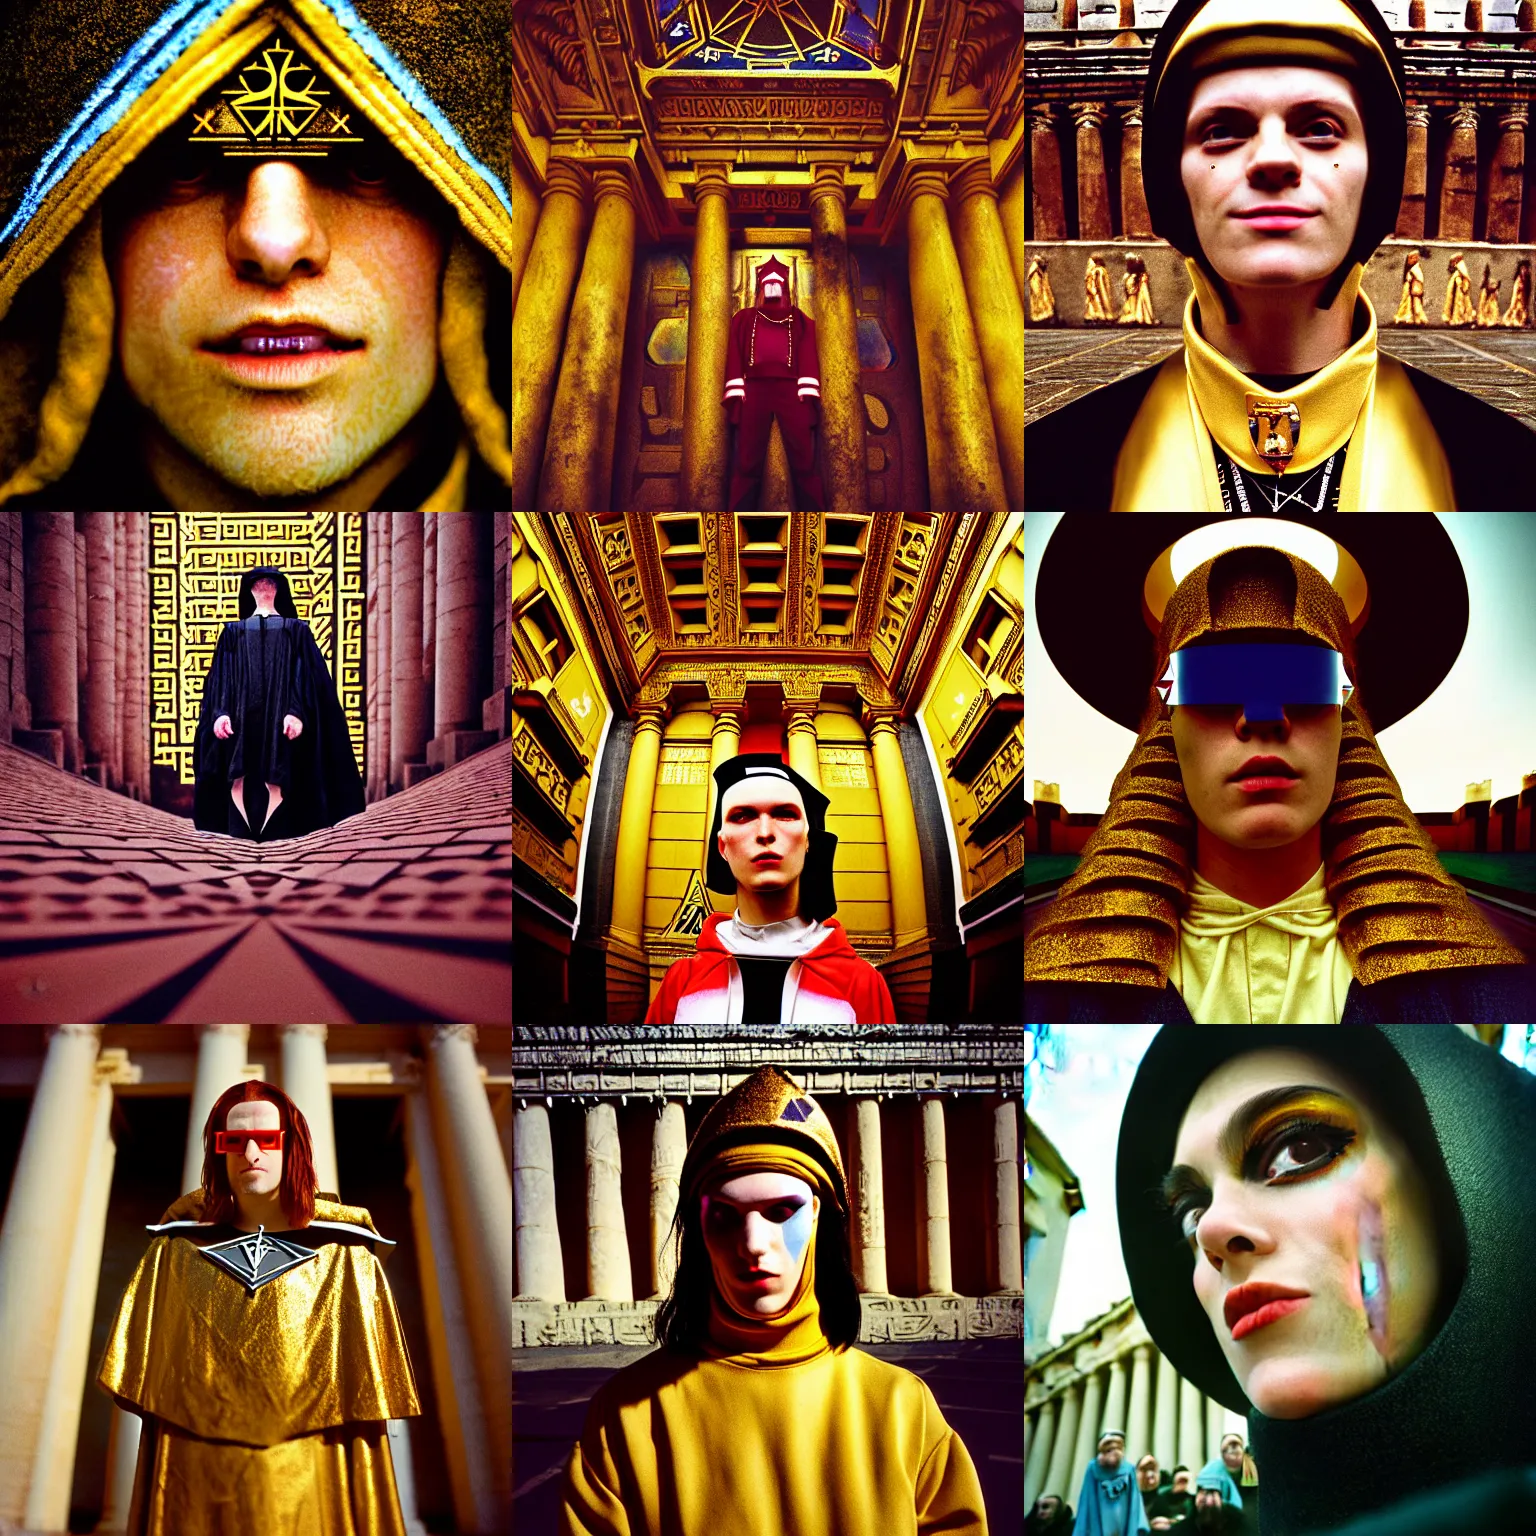 Prompt: kodak portra 4 0 0, 8 k, highly detailed, three point perspective ; beautiful extreme closeup street fashion portrait : masonic style templar wachowski film still inspired by biohack alchemy ( 1 9 2 0 ) temple ritual scene, h radiant master of ceremony regalia, designed babylonian temple background, highly detailed, golden ratio composition